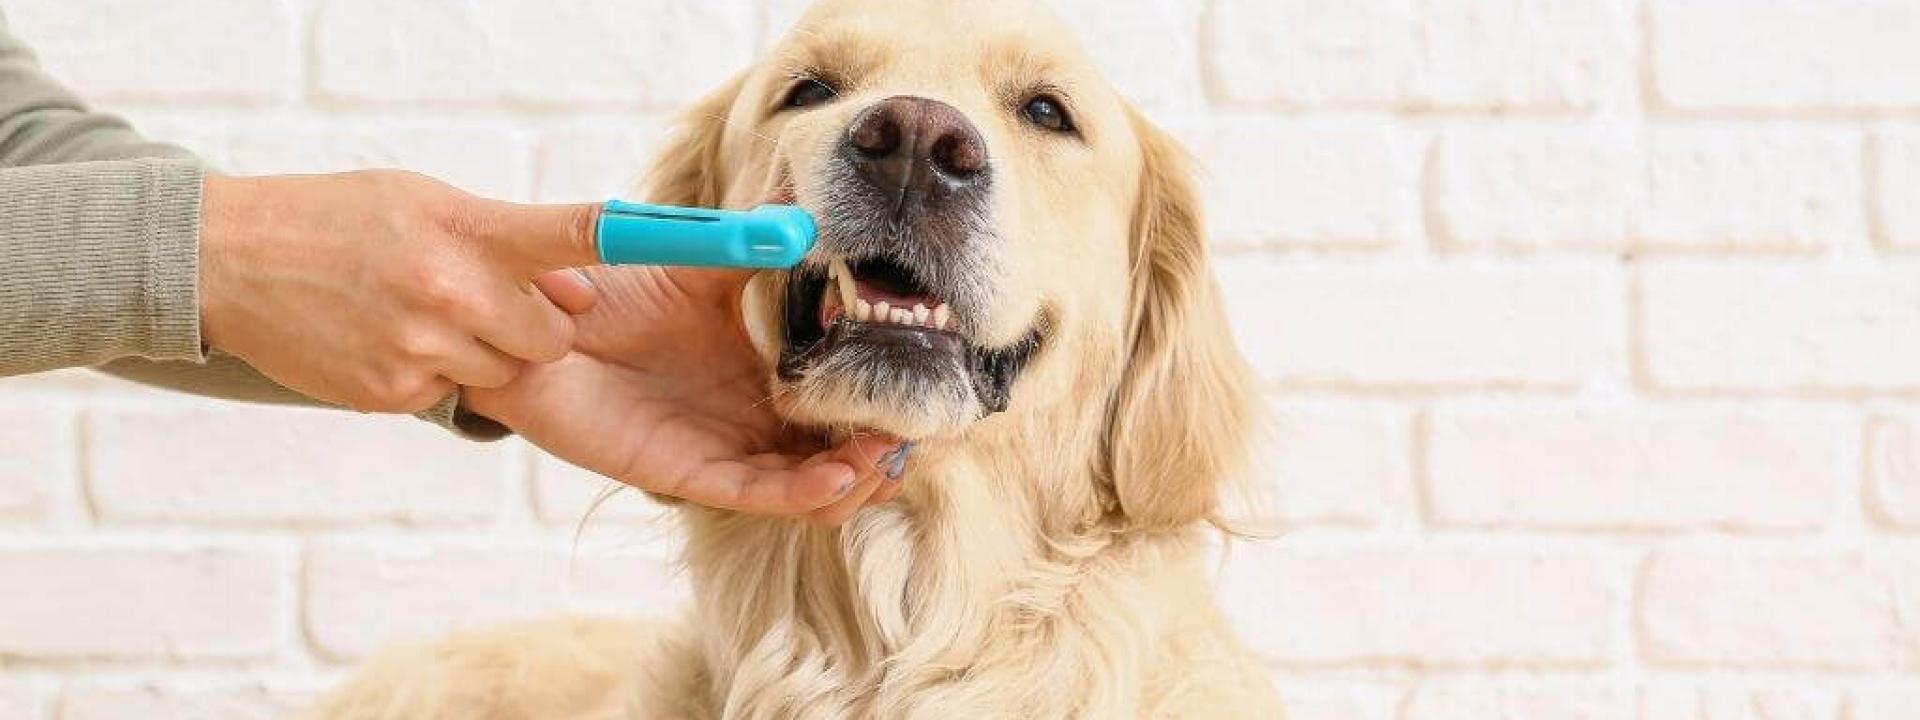 home dental care tips for your dog